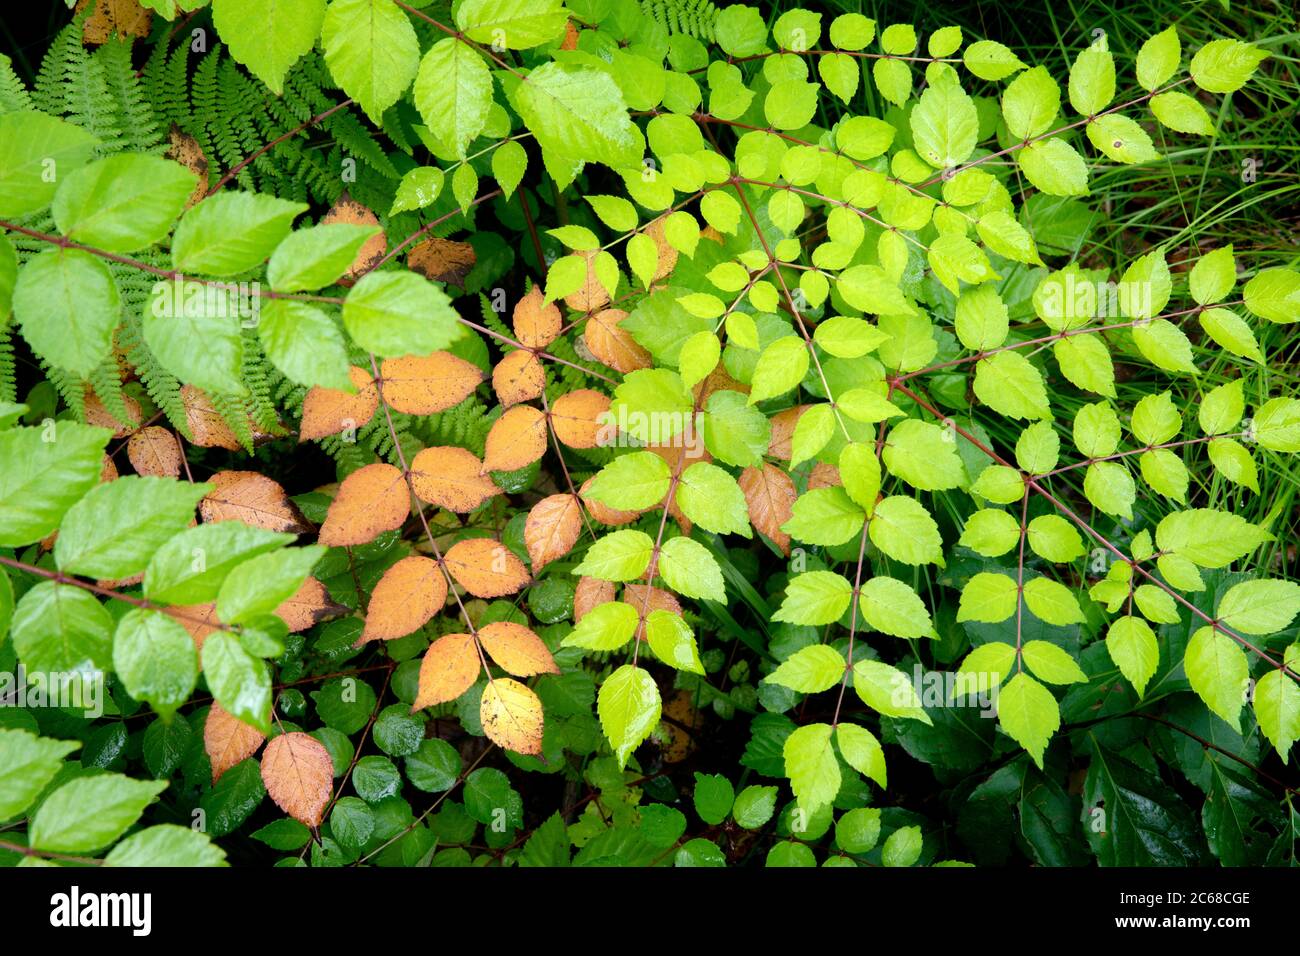 Colorful compound leaf patterns of Devil's Walking Stick or Hercules Club (Aralia spinosa) - Pisgah National Forest, Brevard, North Carolina, USA Stock Photo